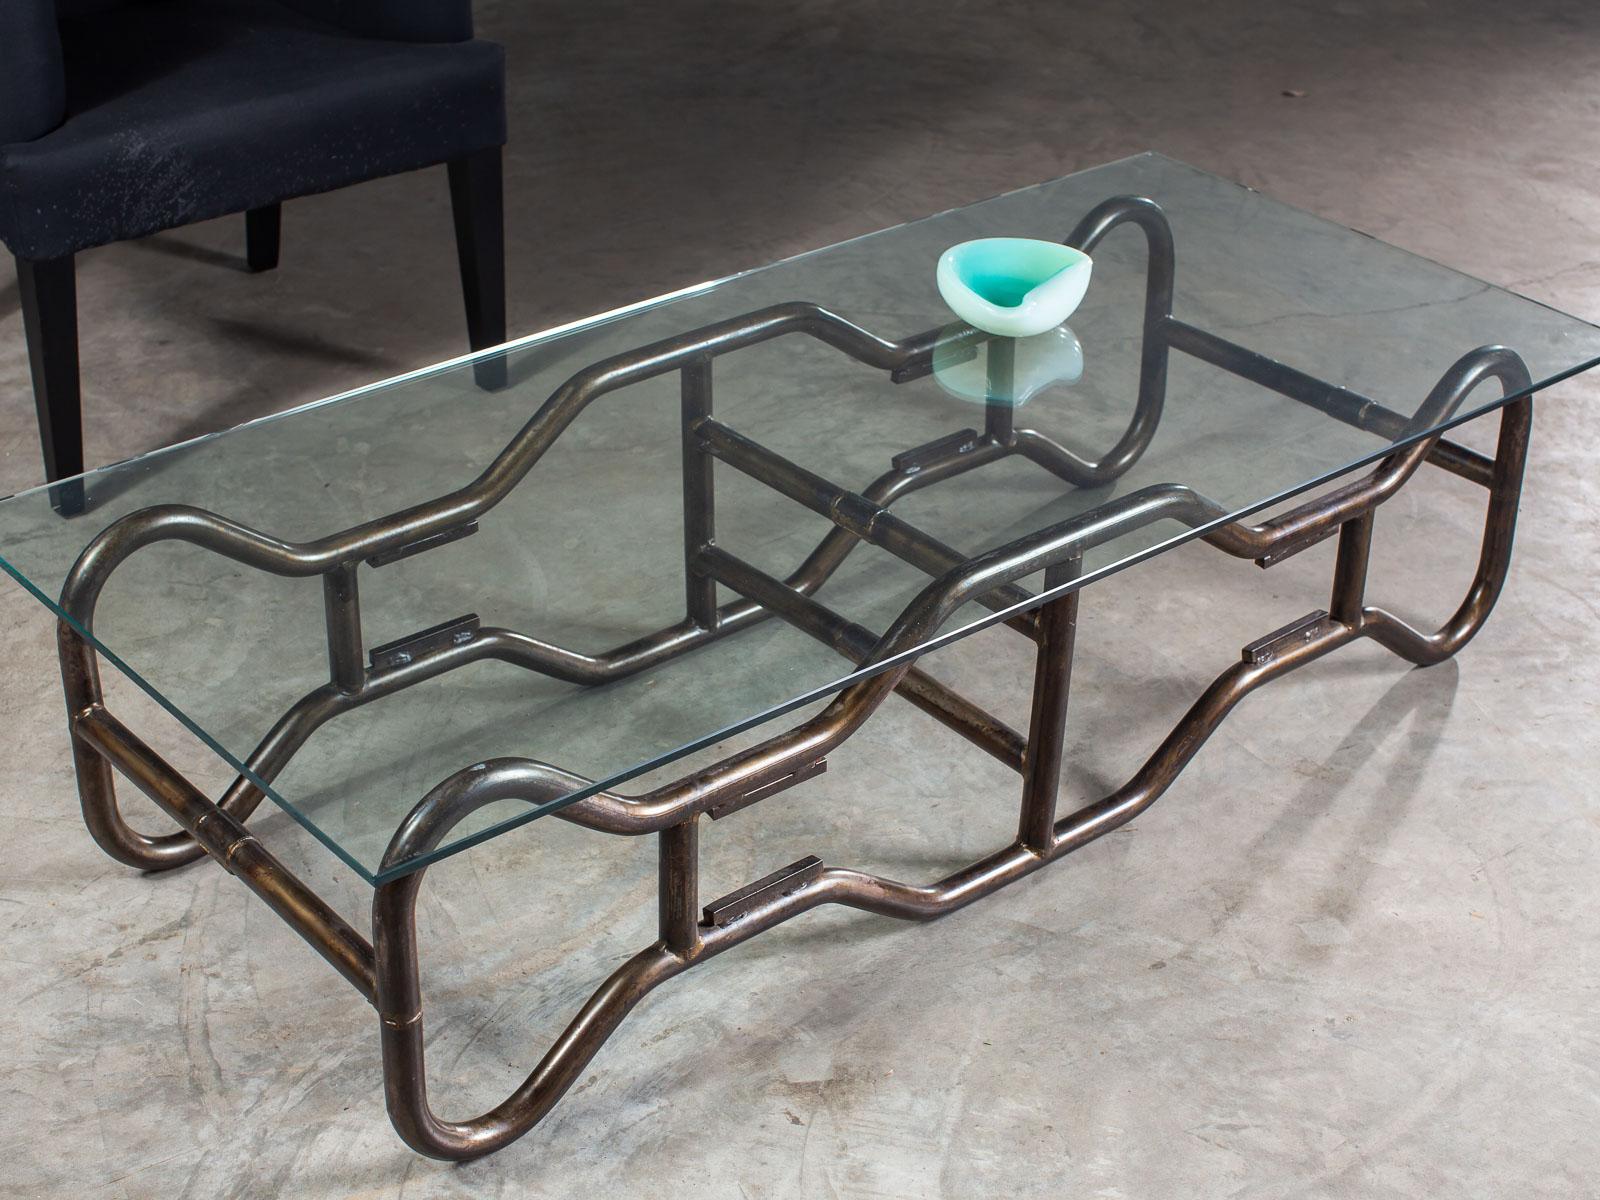 Modern French Industrial Steel Frame Glass Top Coffee Table, circa 1970 For Sale 11